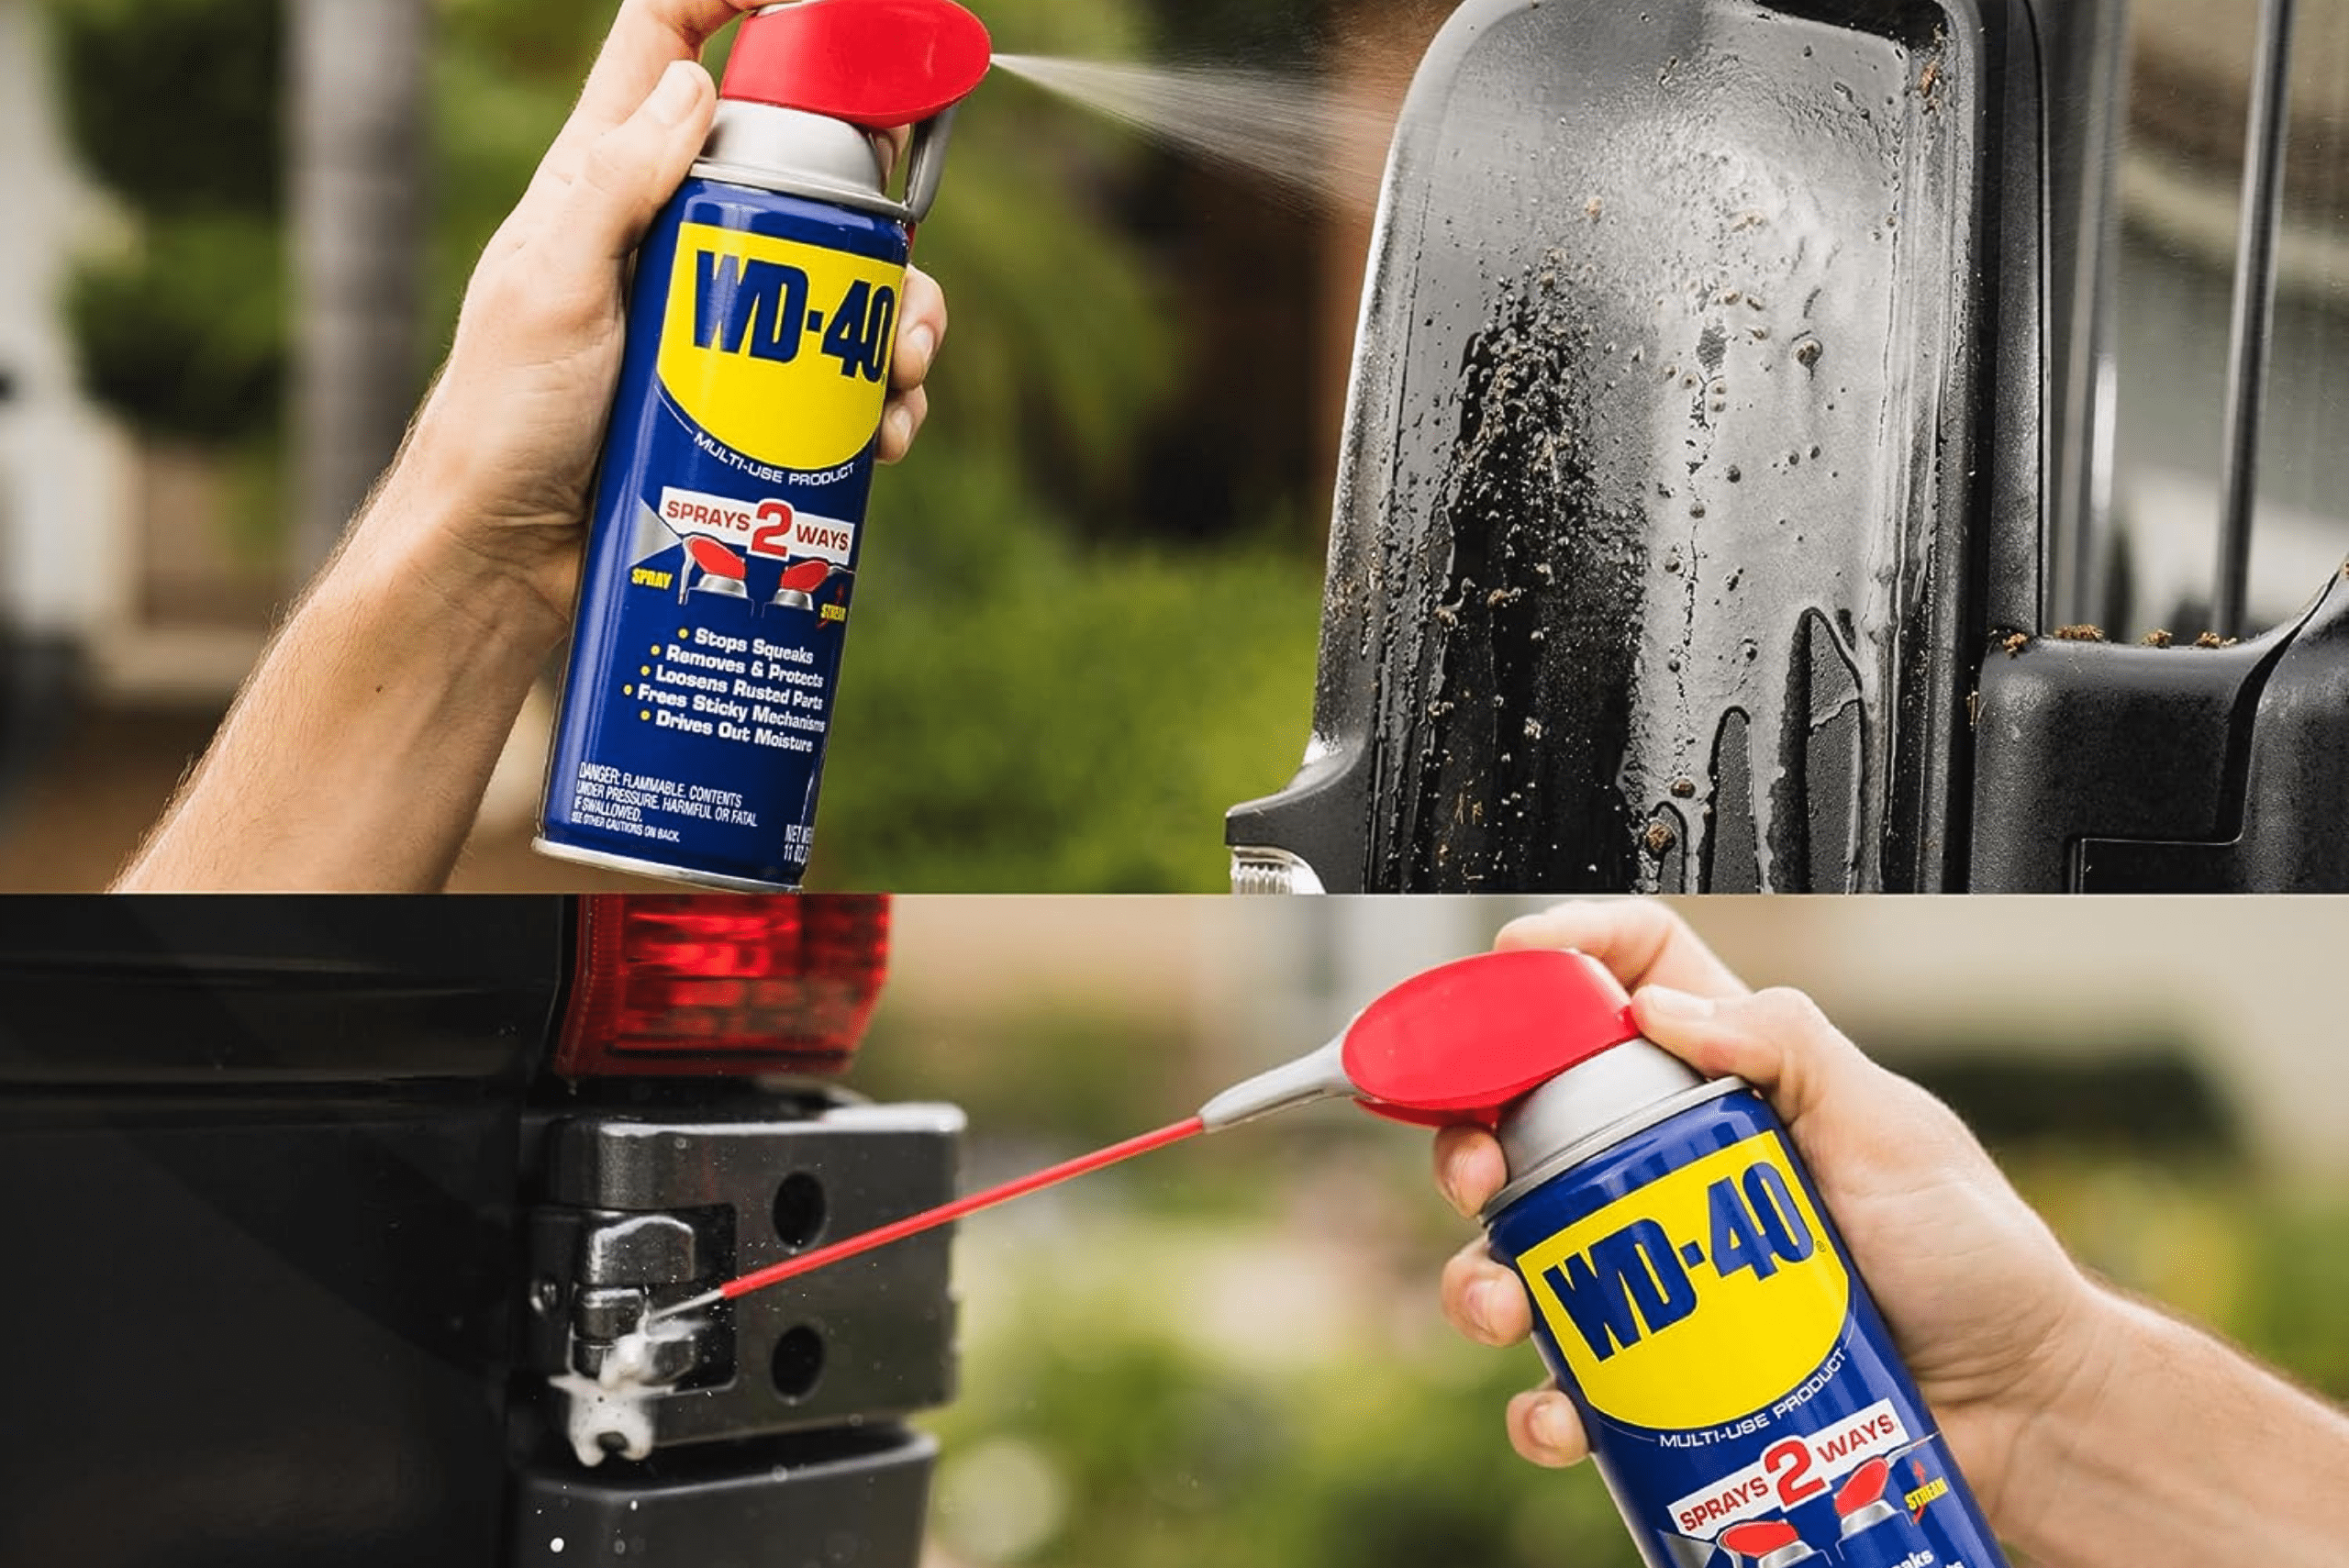 WD-40 being used on vehicle and